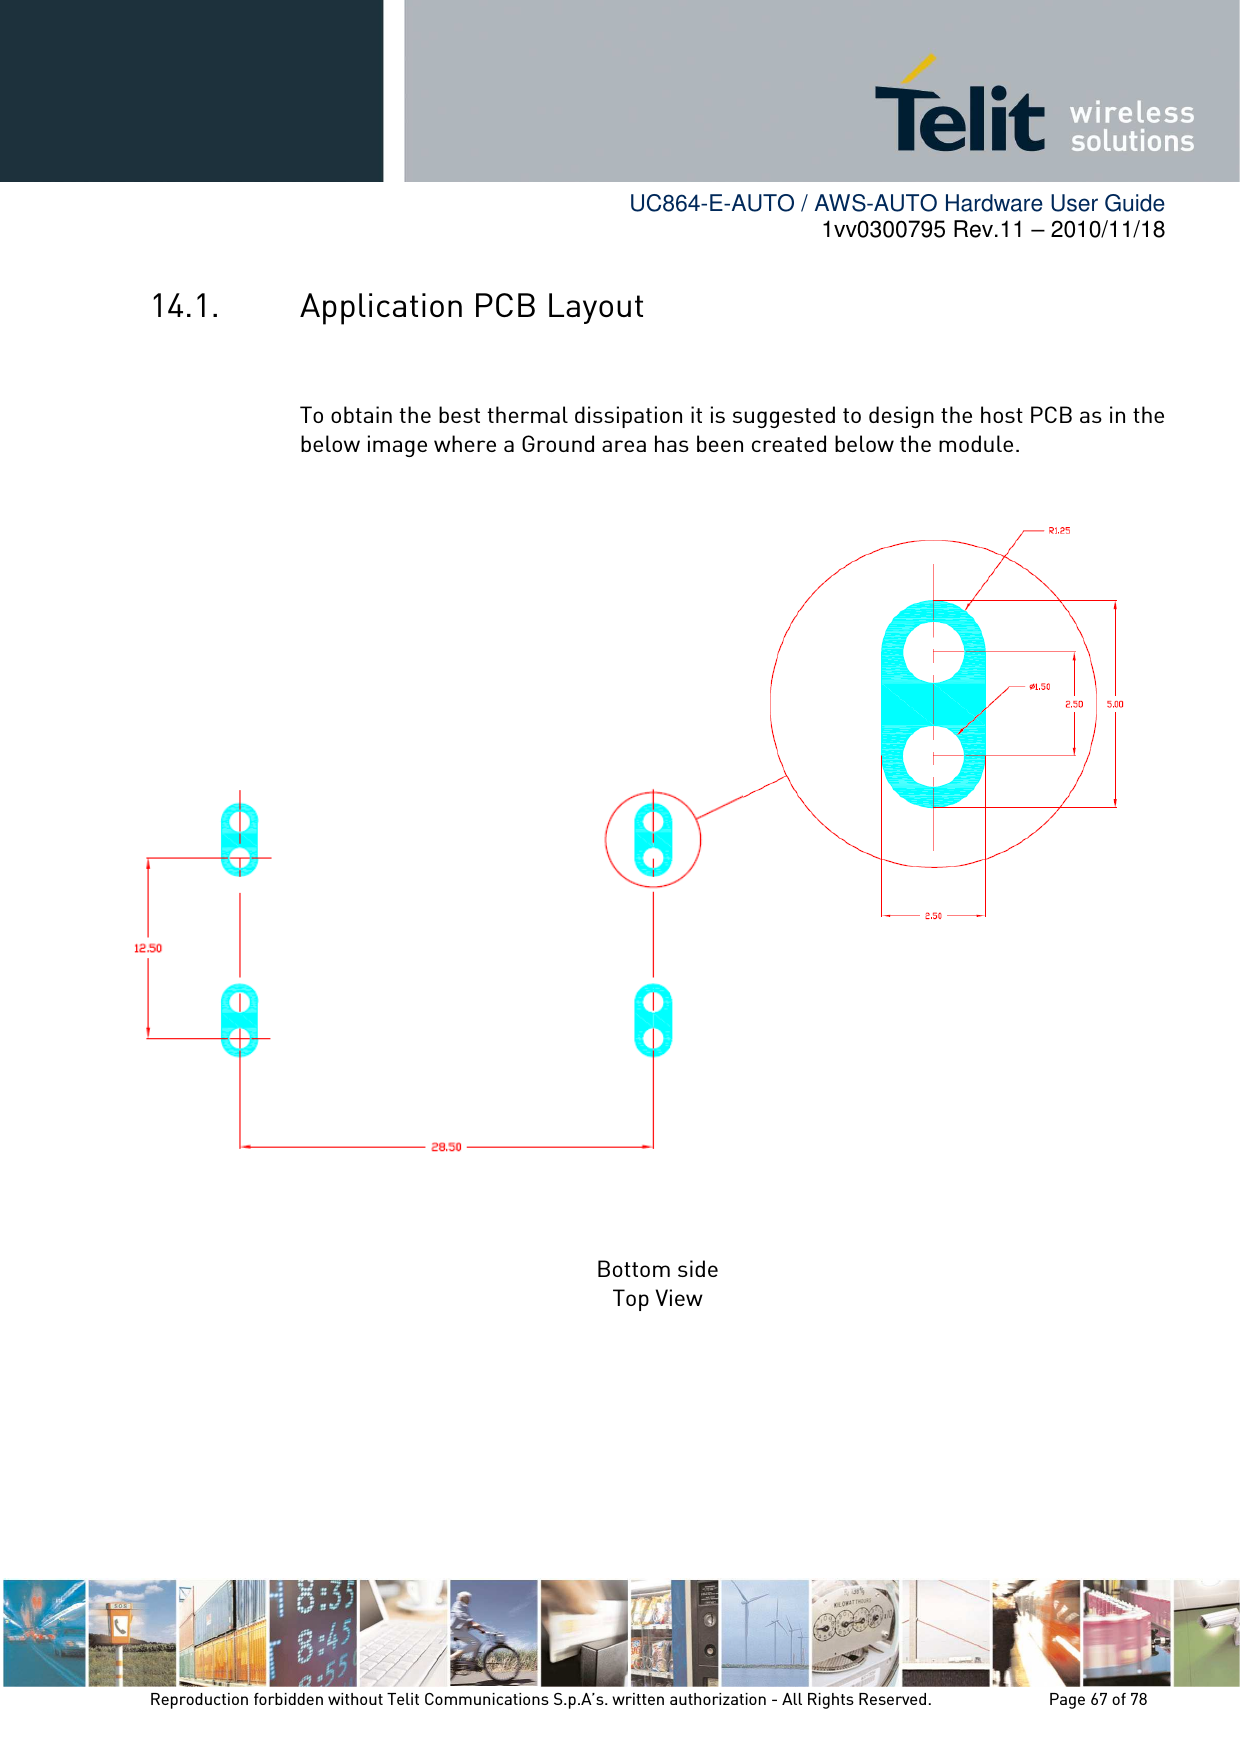        UC864-E-AUTO / AWS-AUTO Hardware User Guide 1vv0300795 Rev.11 – 2010/11/18     Reproduction forbidden without Telit Communications S.p.A’s. written authorization - All Rights Reserved.    Page 67 of 78  14.1. Application PCB Layout  To obtain the best thermal dissipation it is suggested to design the host PCB as in the below image where a Ground area has been created below the module.                    Bottom side Top View    